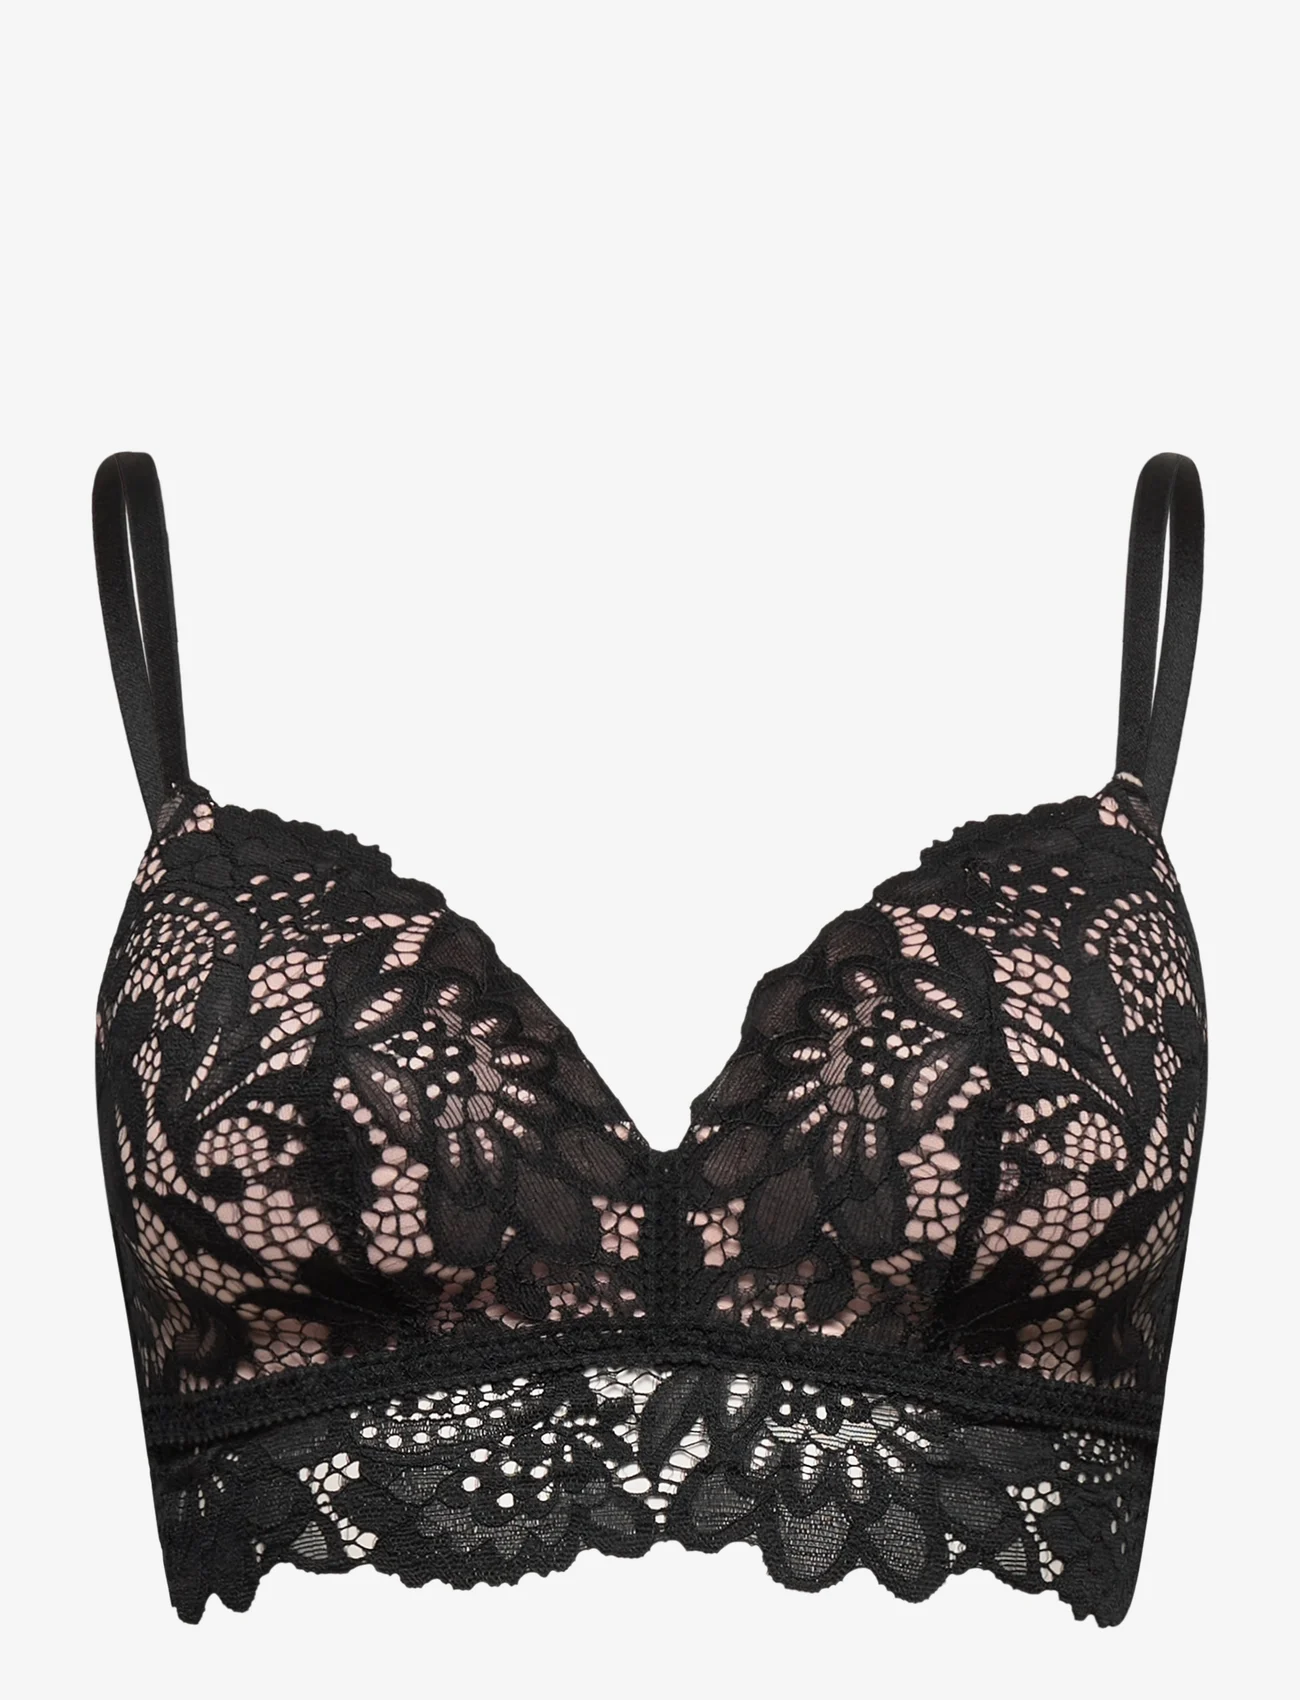 Hunkemöller - Shiloh non wired low d - push up bh - caviar - 1